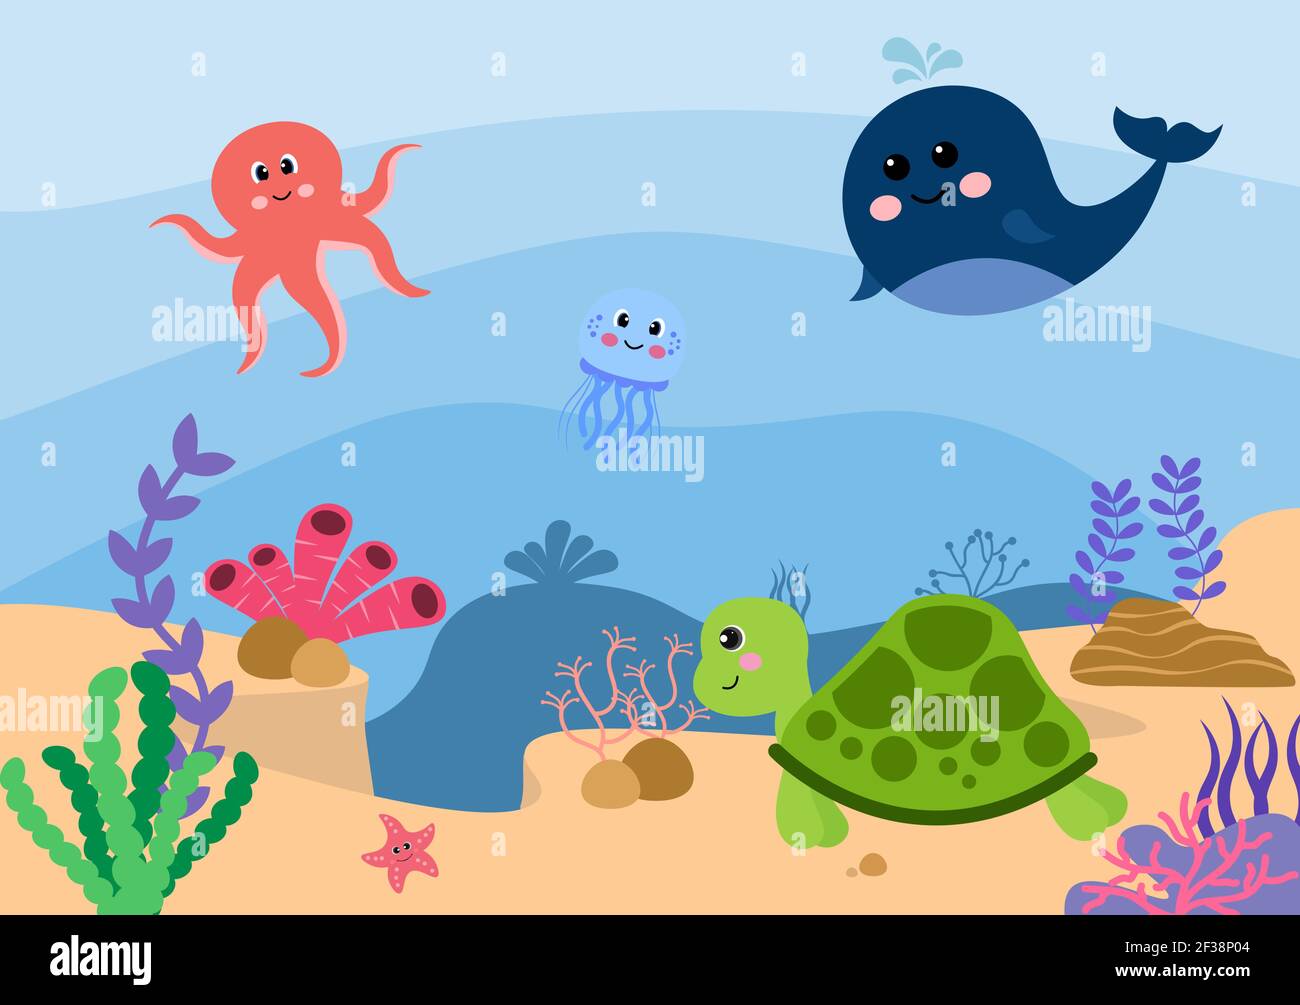 Underwater Scenery and Cute Animal Life in the Sea with Seahorses, Starfish, Octopus, Turtles, Sharks, Fish, Jellyfish, Crabs Design. Vector Illustrat Stock Vector